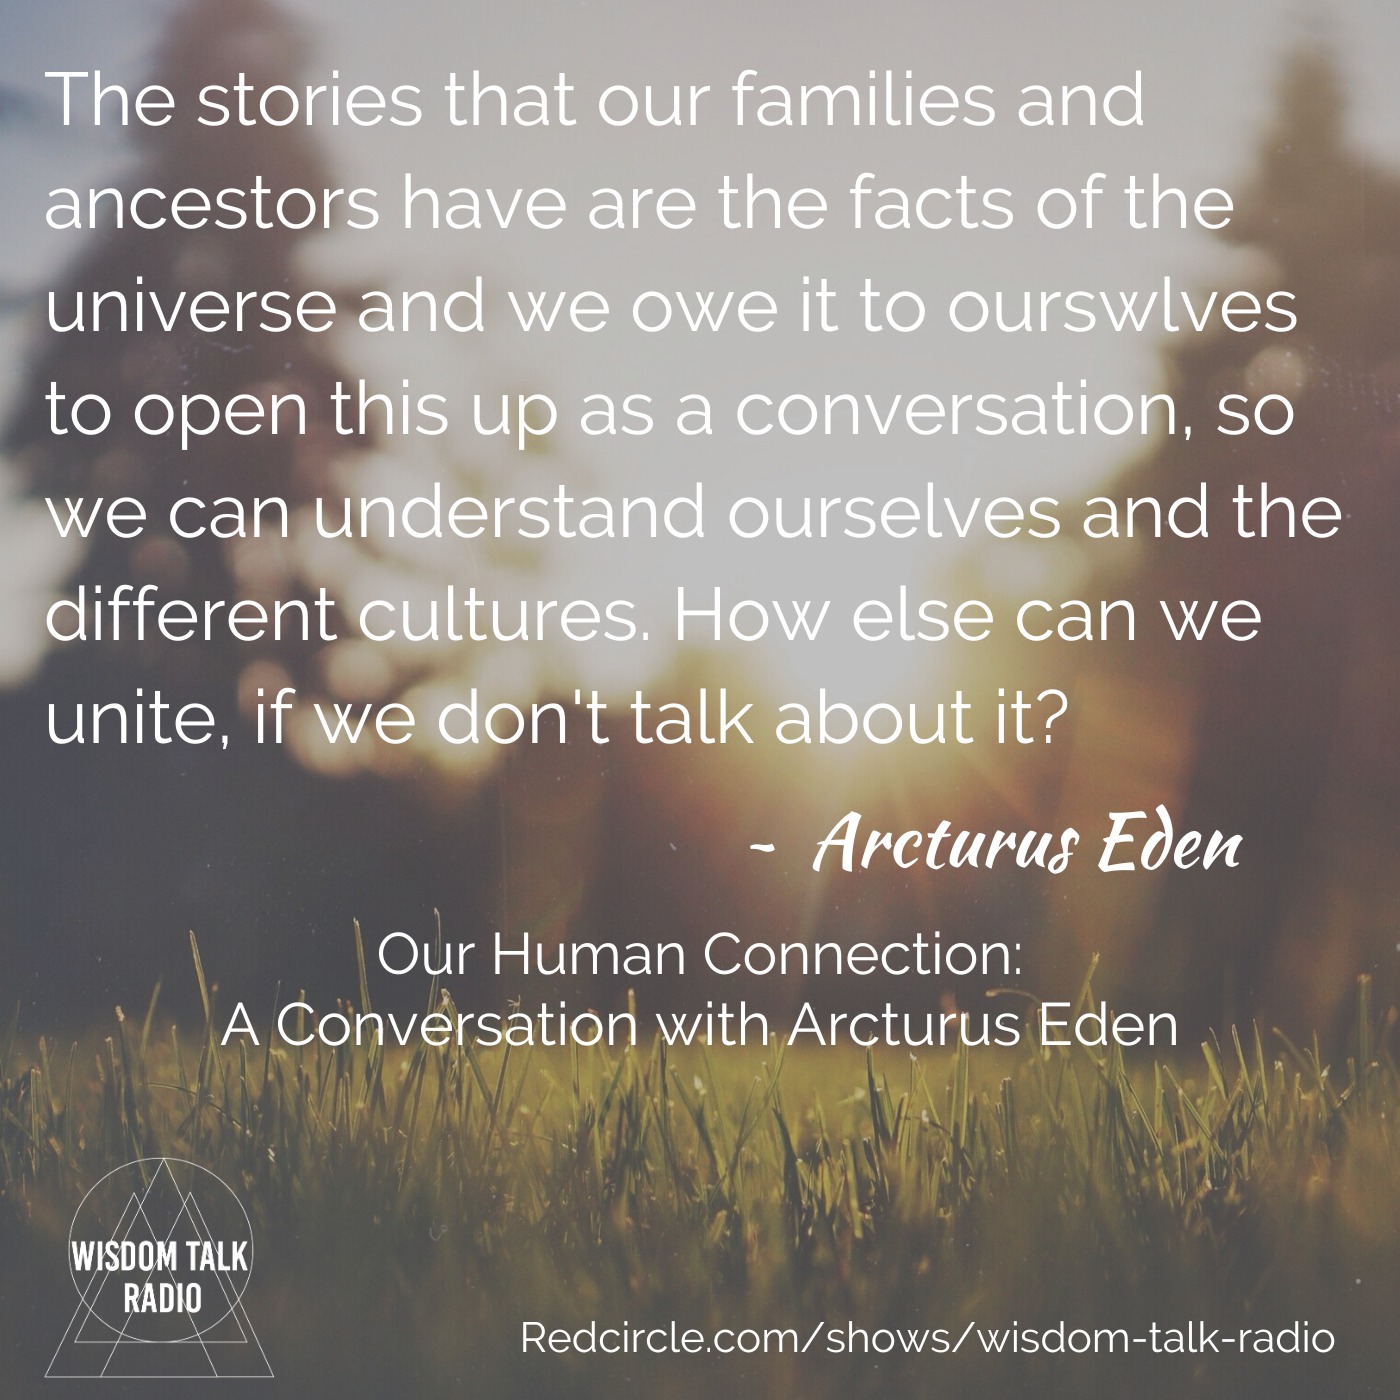 Our Human Connection: a Conversation with Arcturus Eden